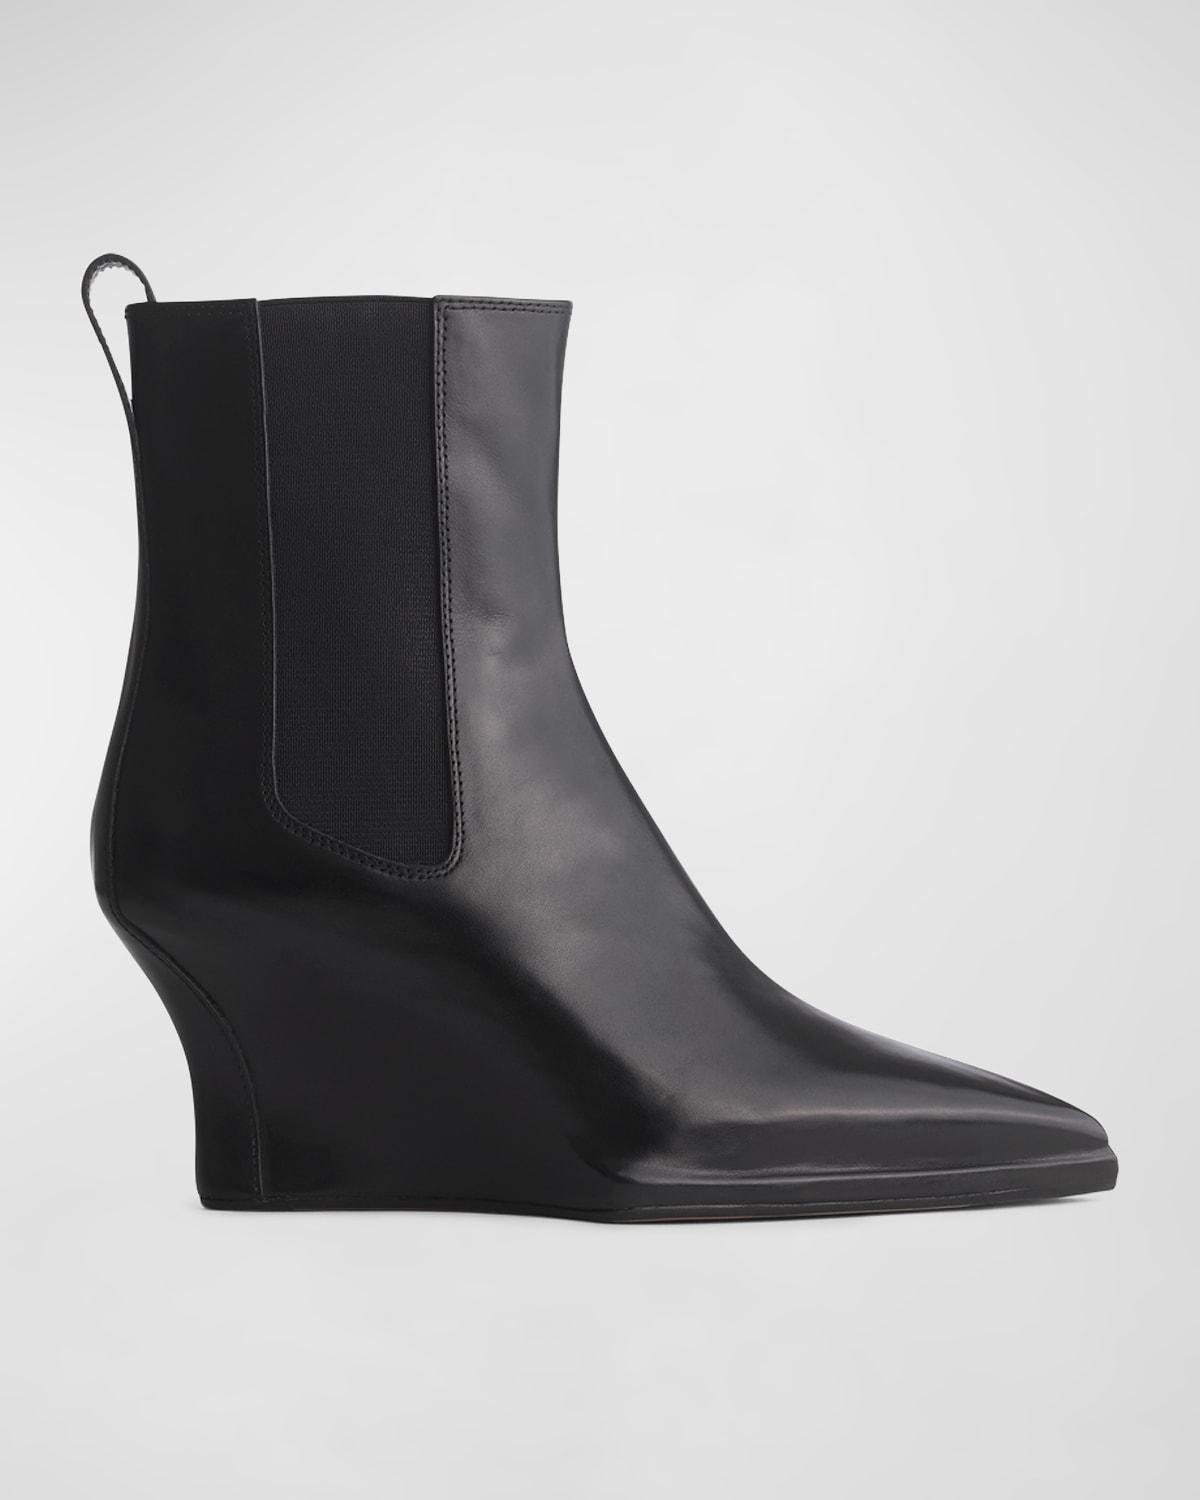 rag & bone Eclipse Pointed Toe Wedge Chelsea Boot Product Image